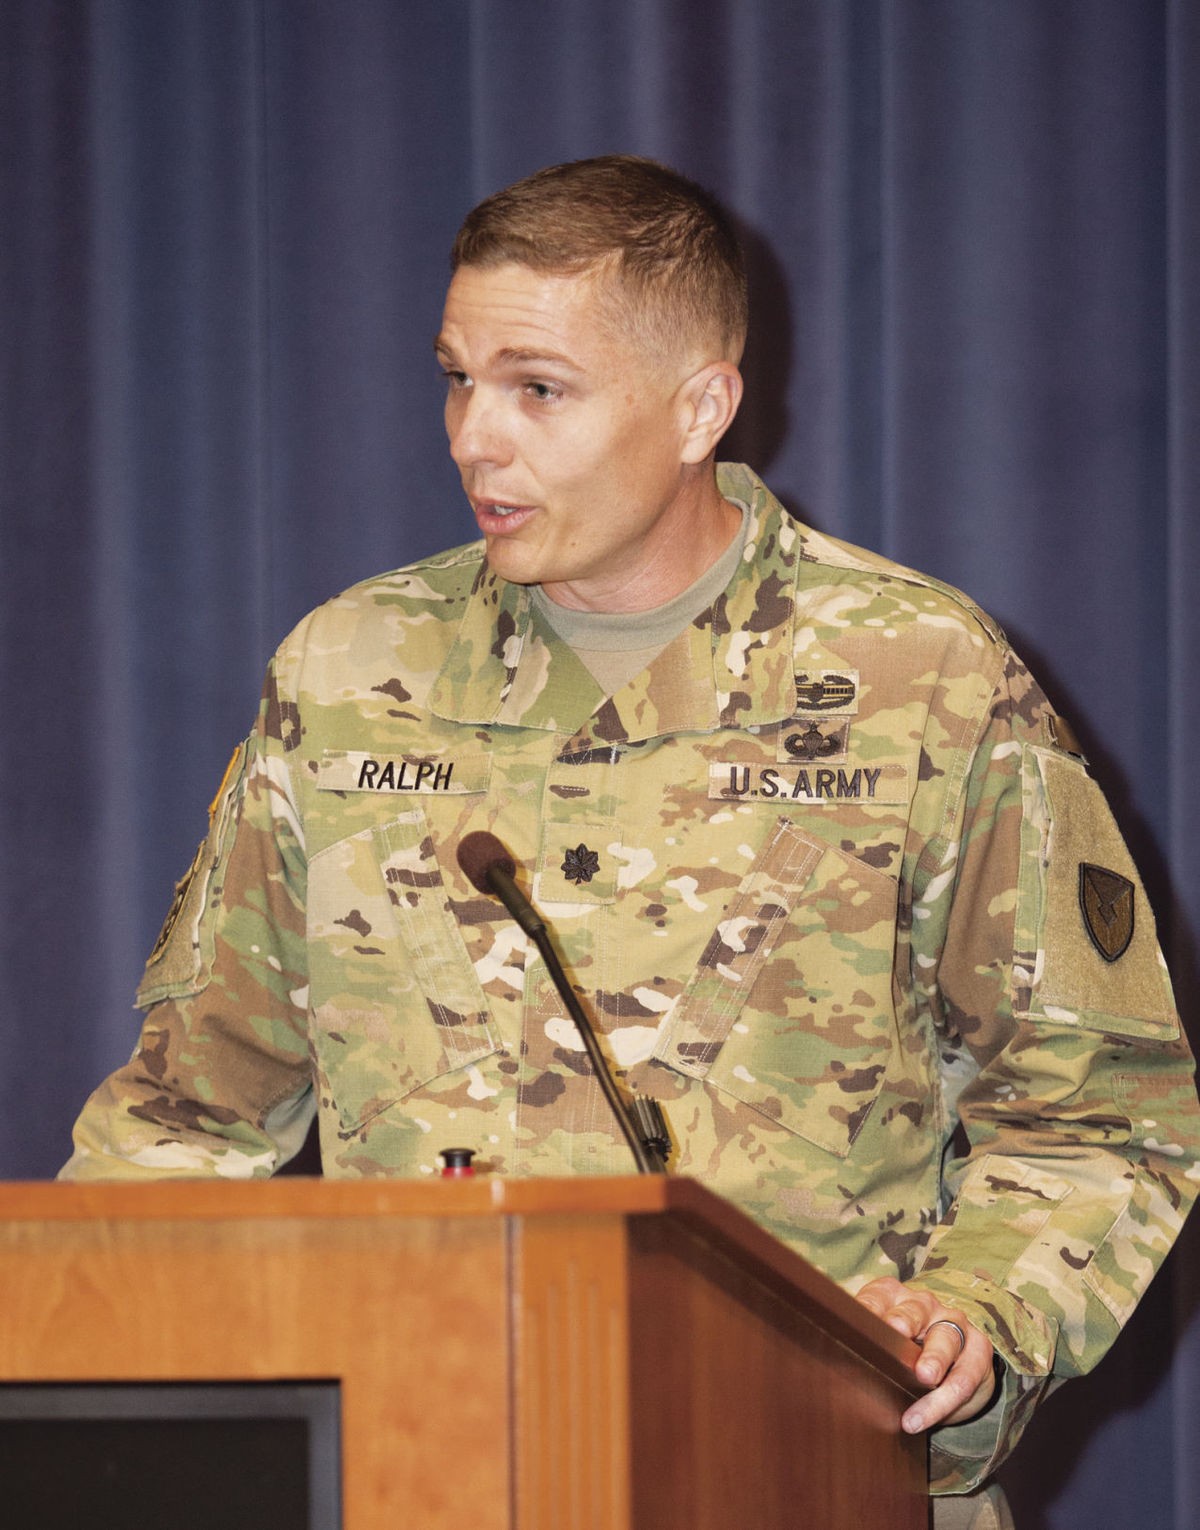 MICCFort Belvoir new leader Article The United States Army